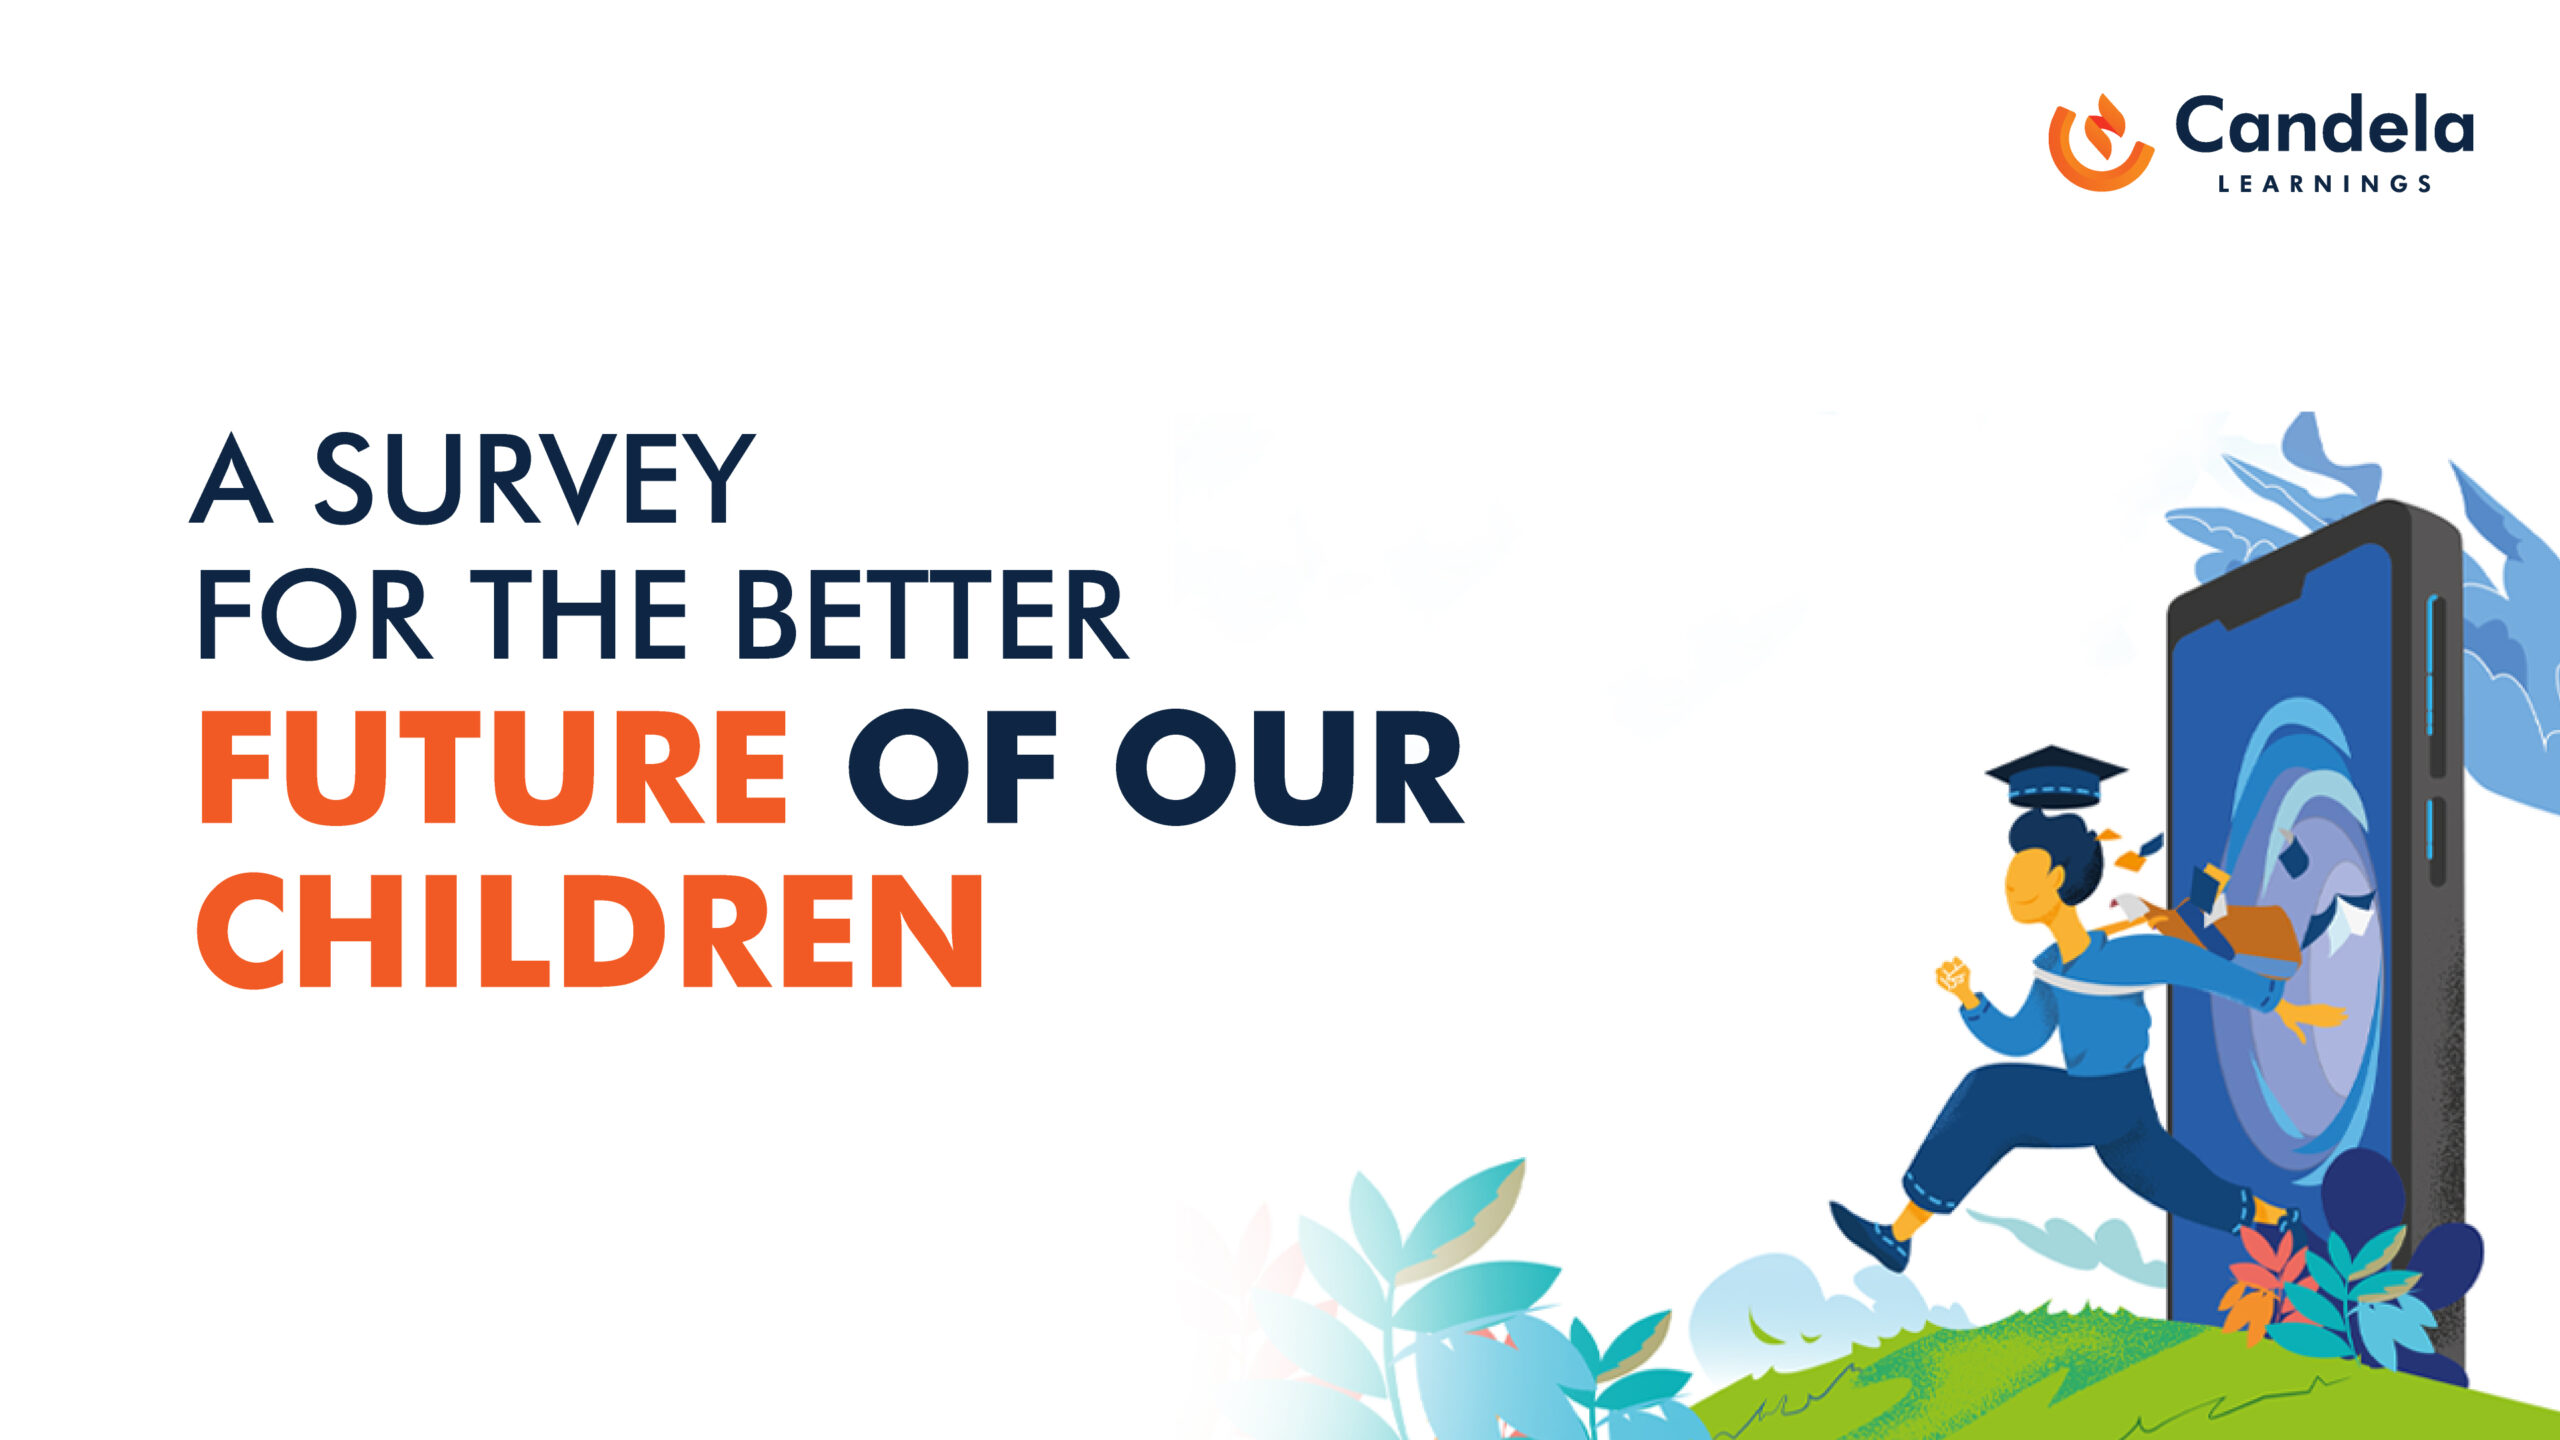 Is this enough? A survey for the better future of our children